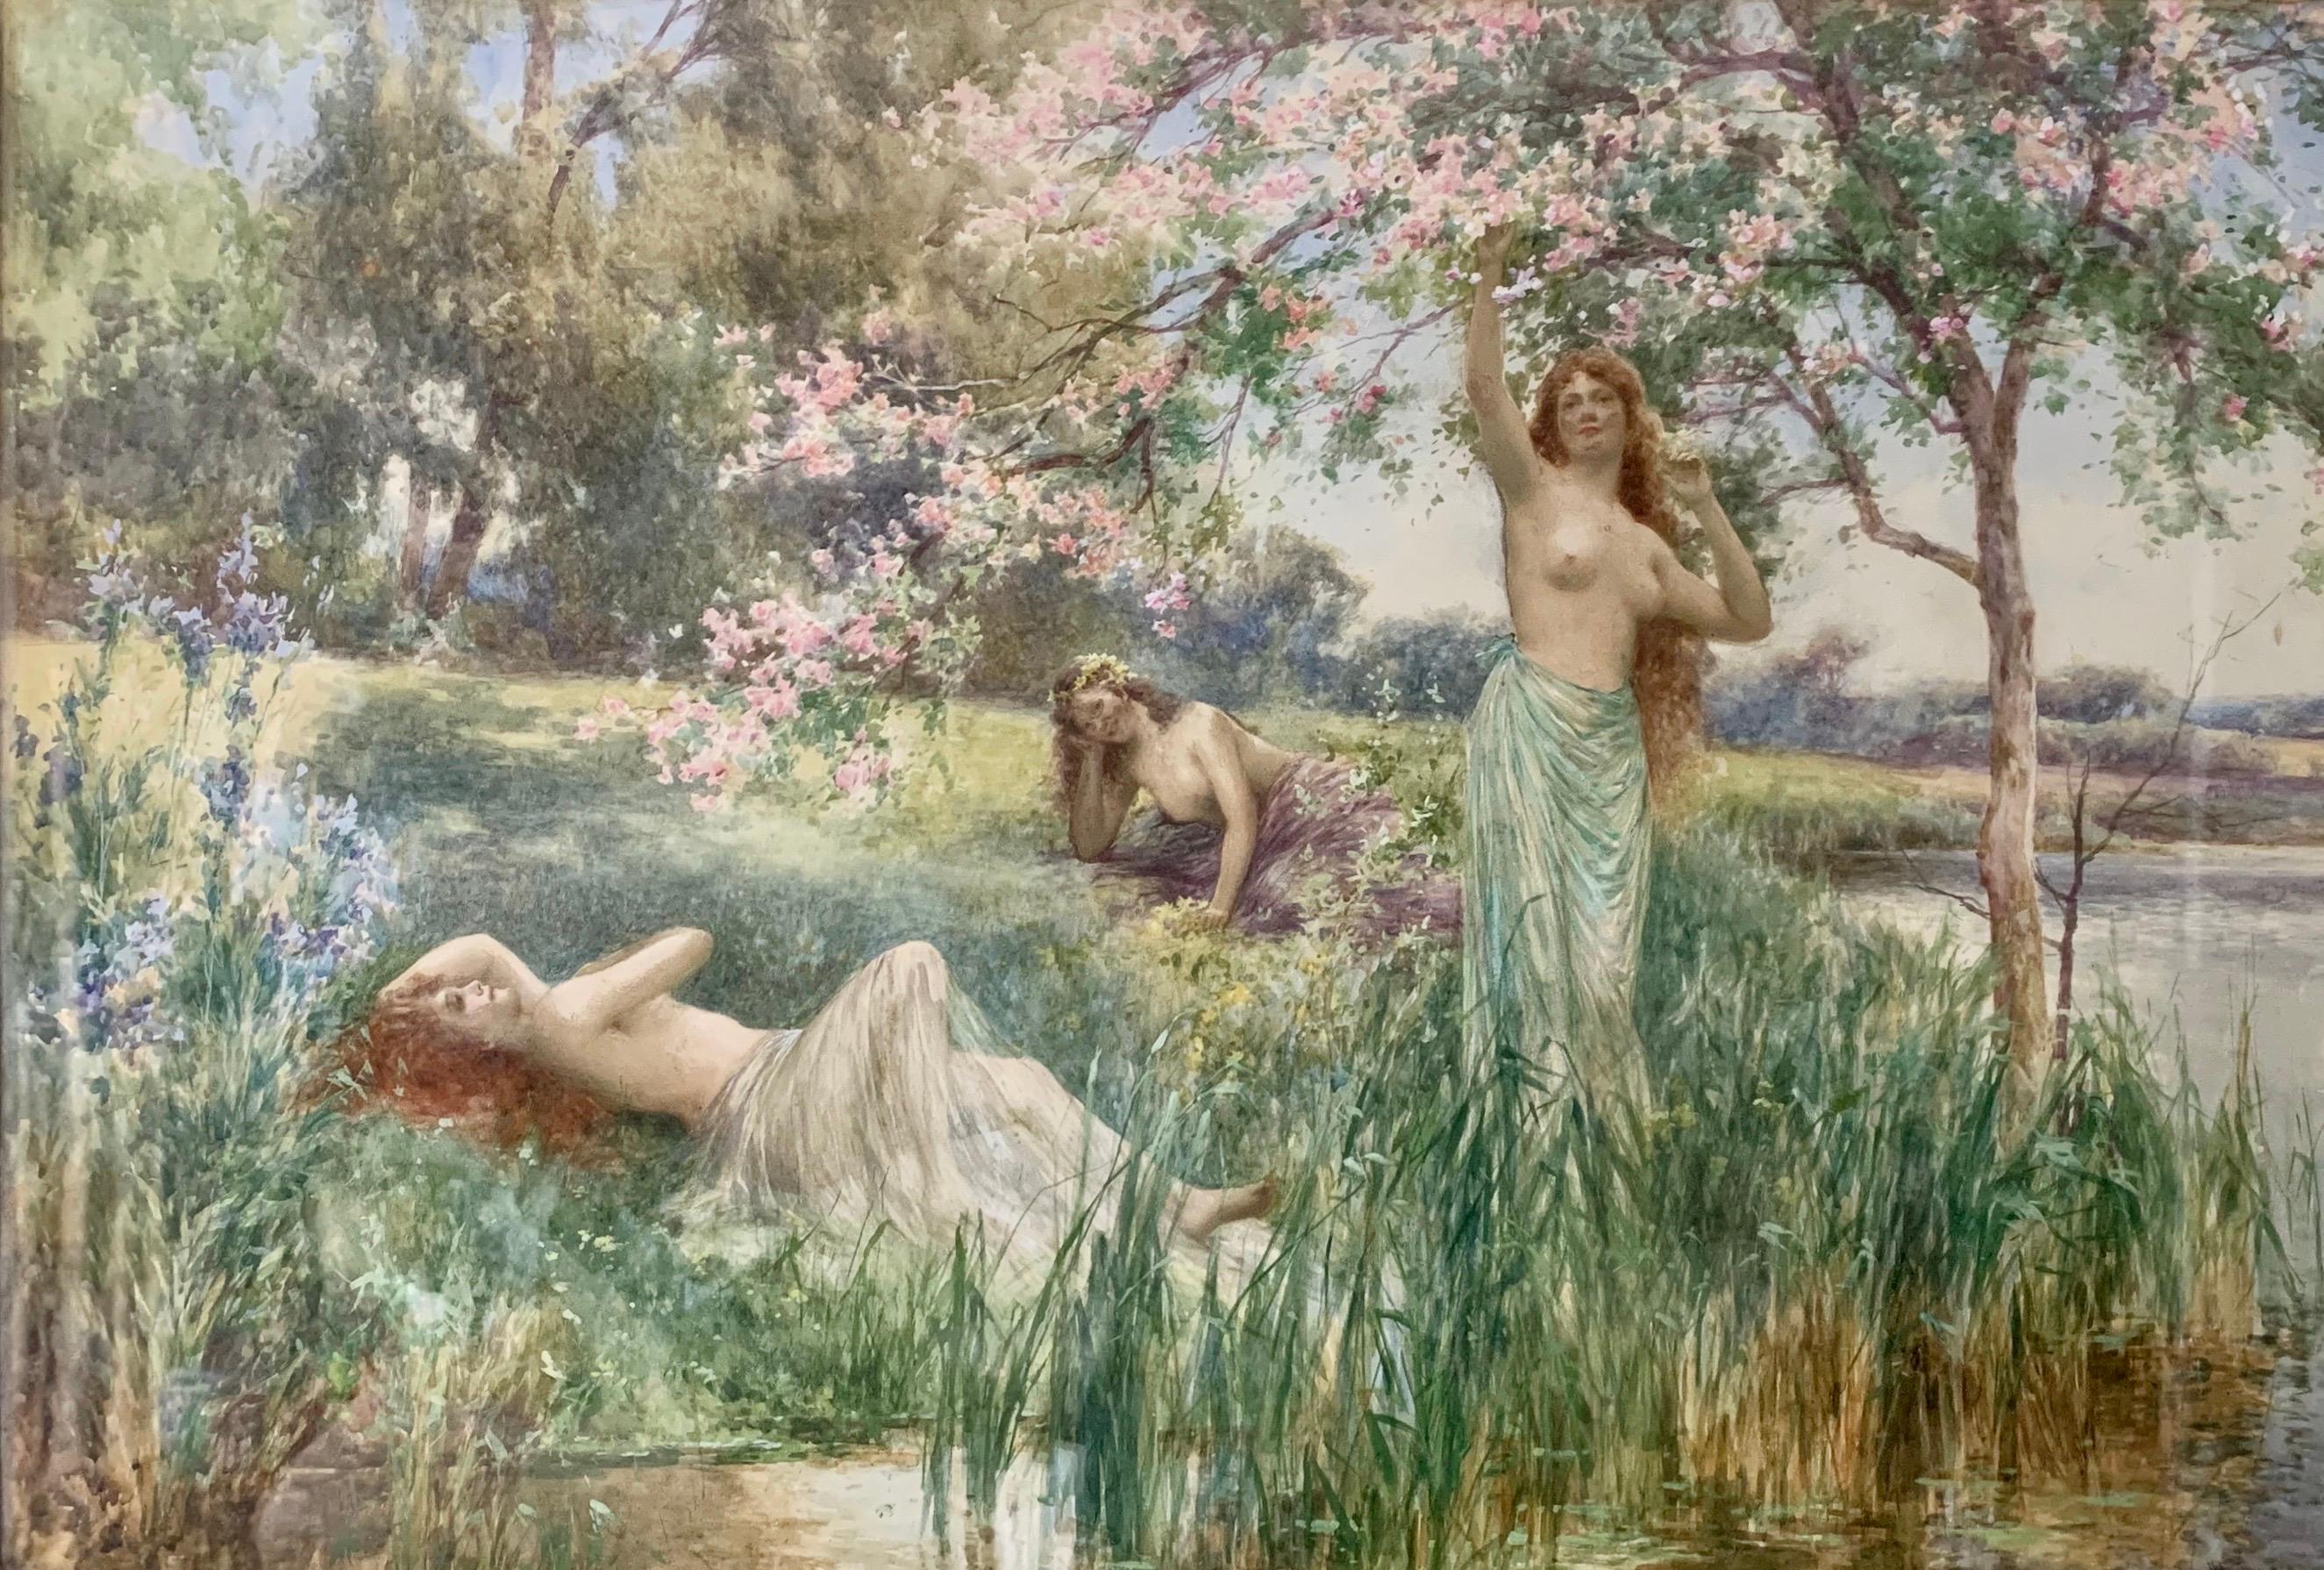 A rare large pre raphaelite painting by this celebrated British Artist
A classic fantasy of semi clad maidens in an idyllic springtime
pastoral scene.
This fabulous painting is steeped in English history.
is in very good all round condition and